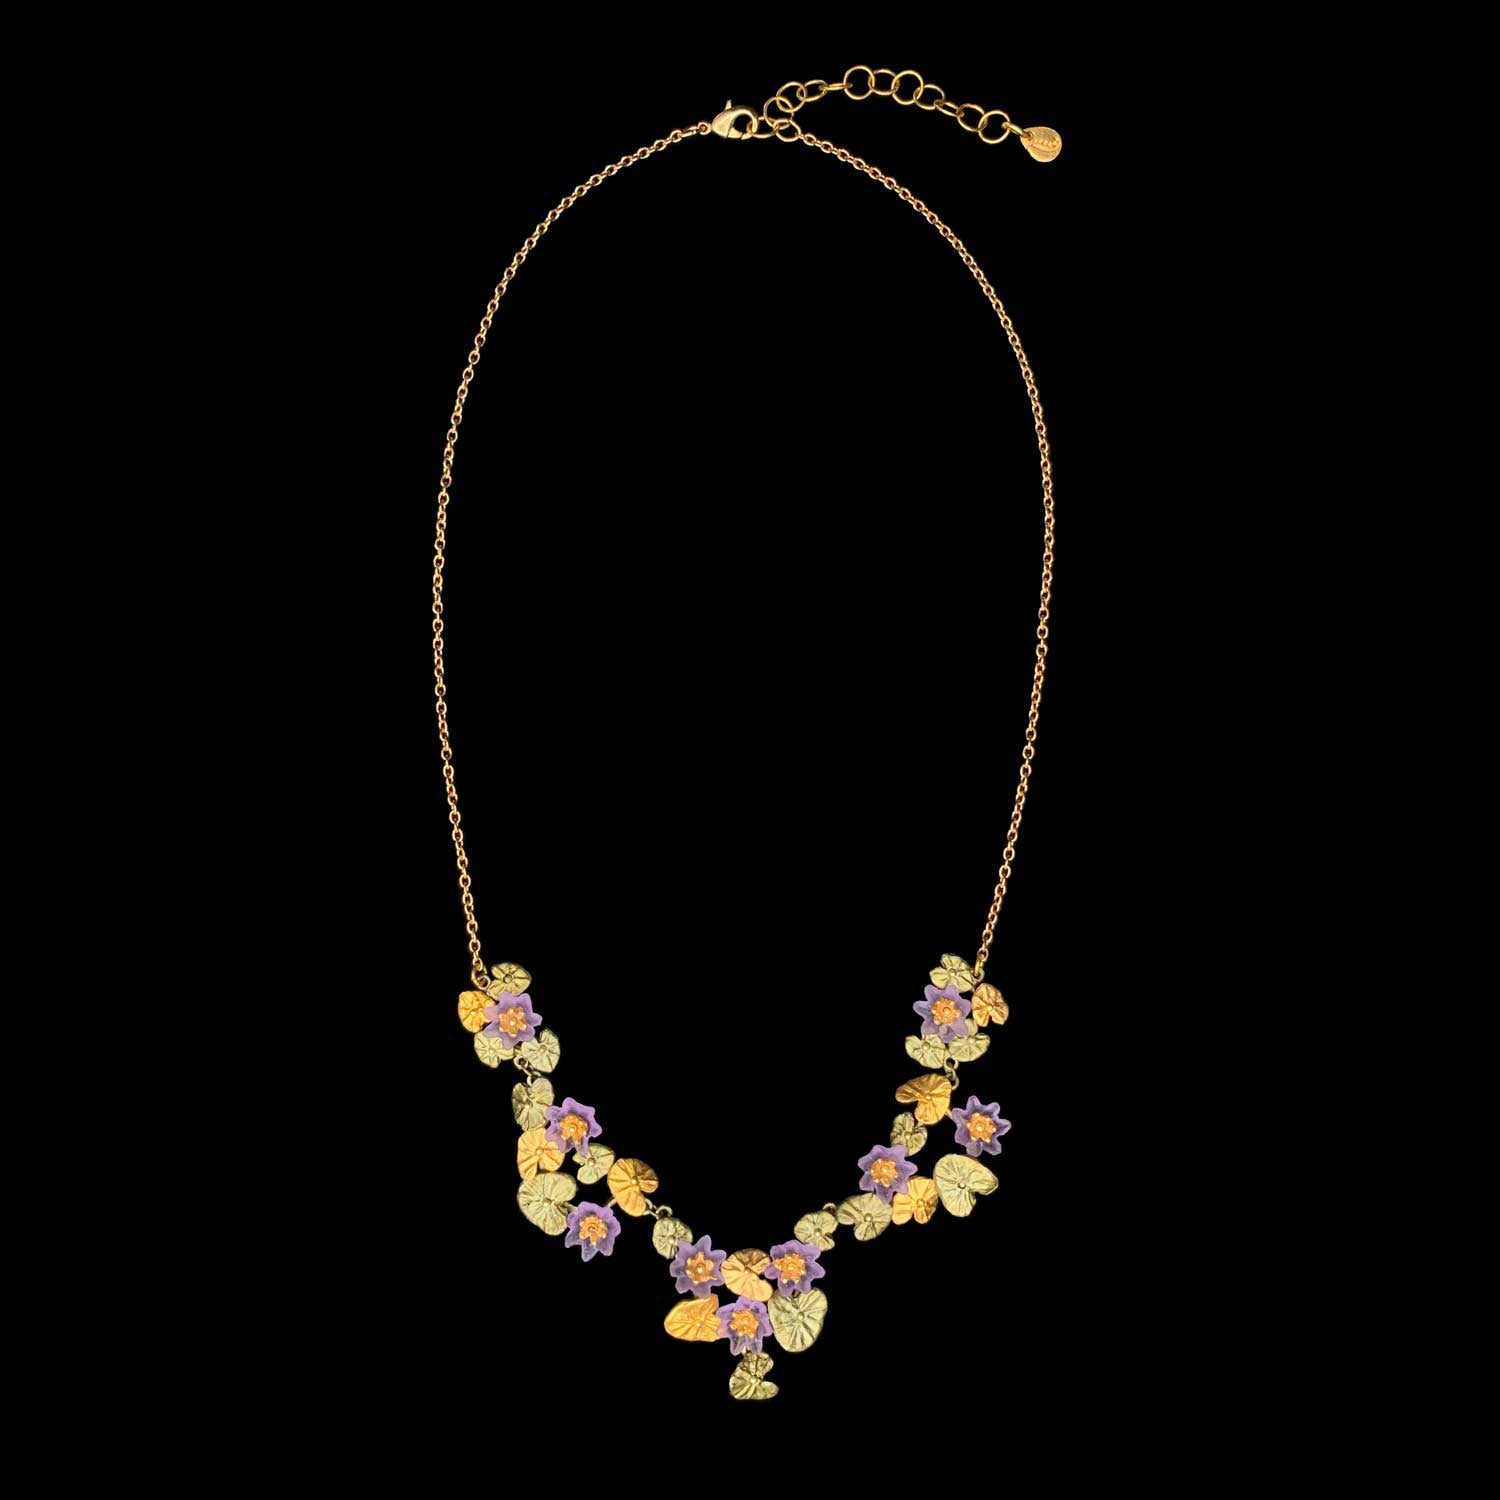 Giverny Water Lilies Necklace - Statement